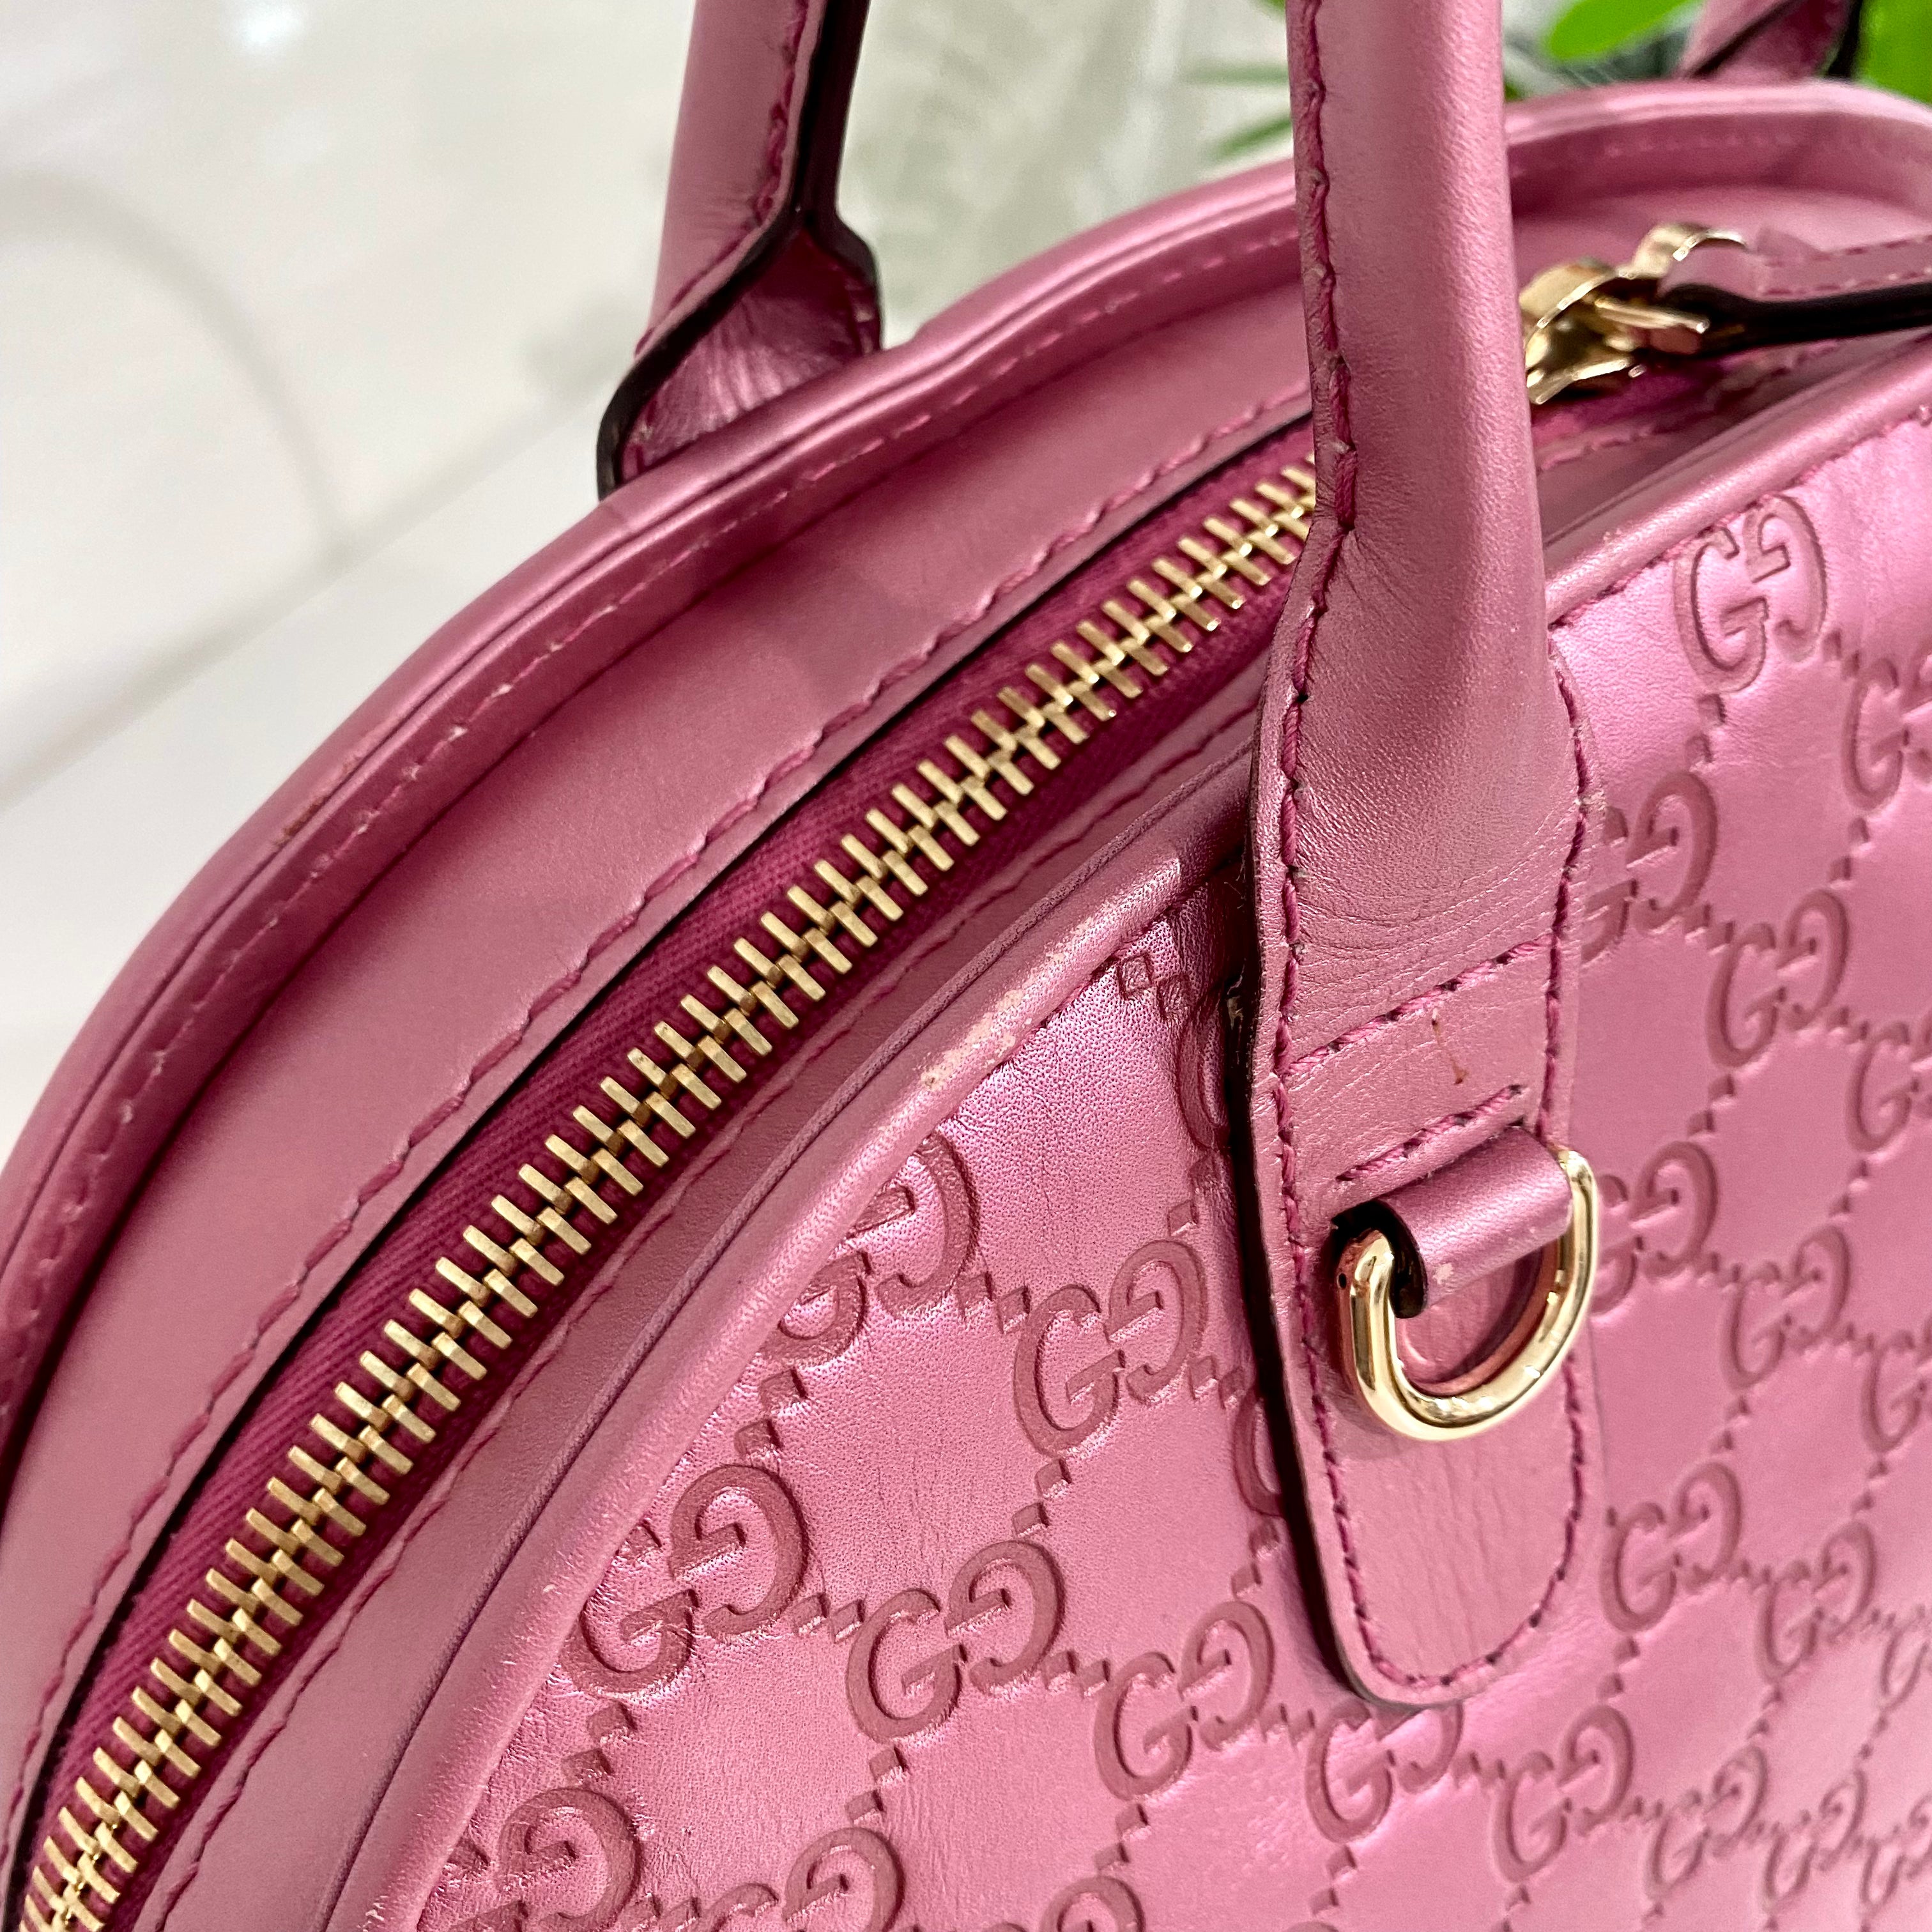 Review GUCCI Mini Dome Satchel Pink 